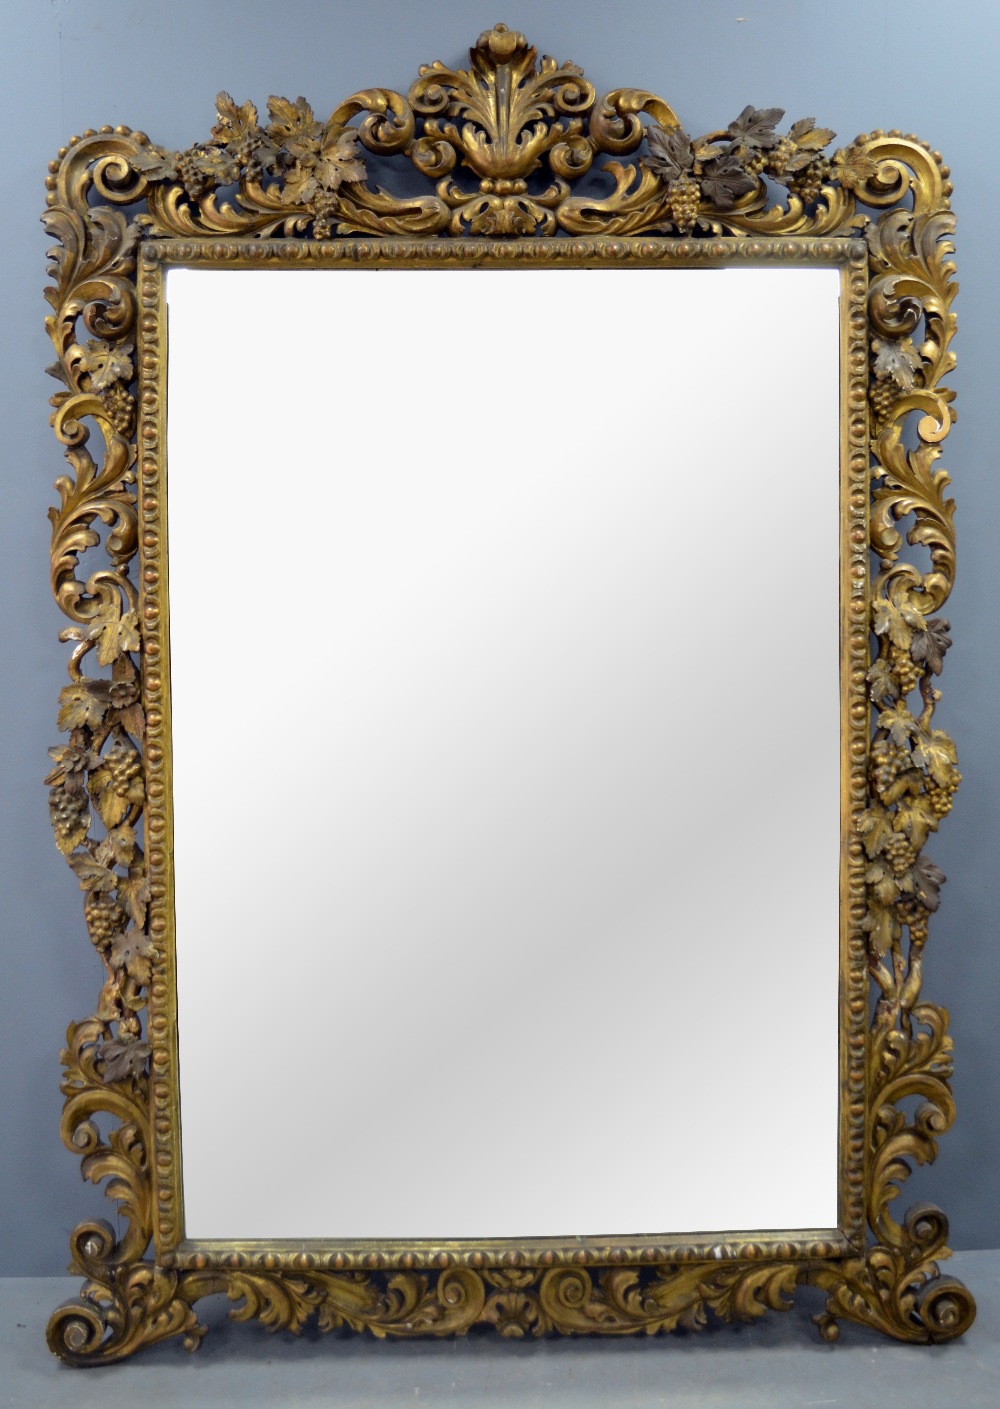 Late 18th /19th century carved wood gilt framed mirror decorated with Rococo forms, grapes and